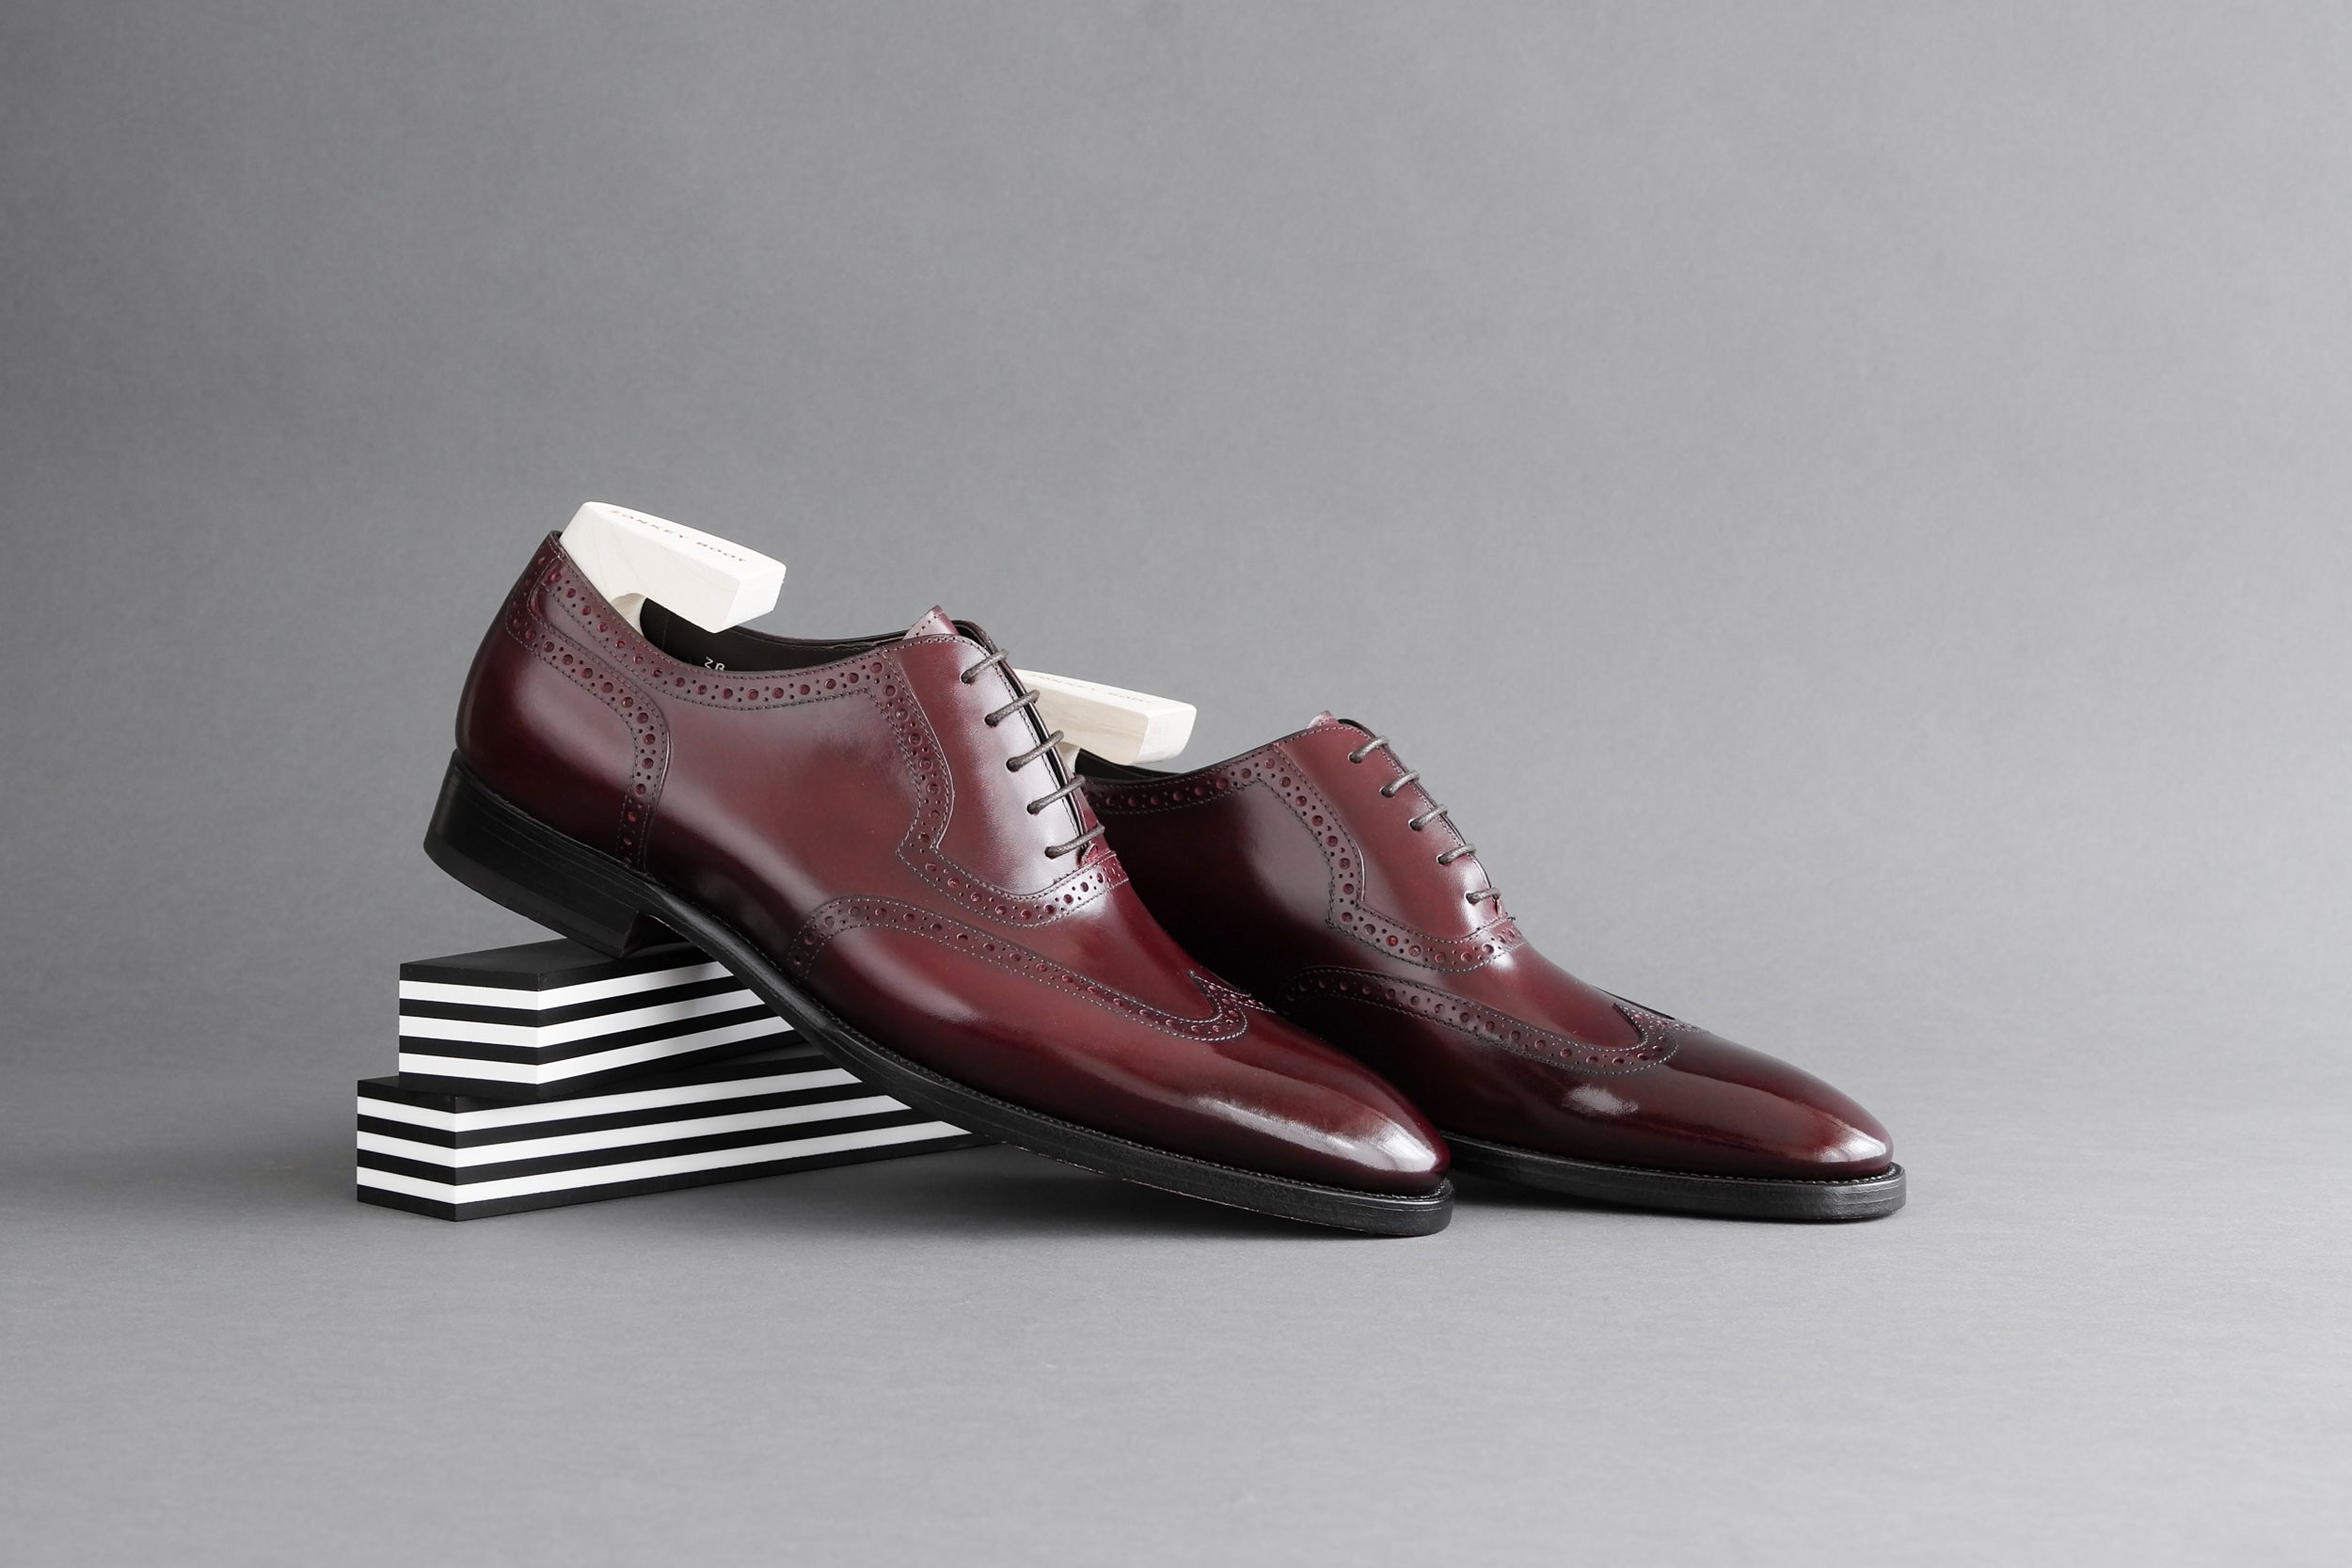 Zonkey Boot hand welted wingtip oxfords in Bavarian Calf Bordeaux